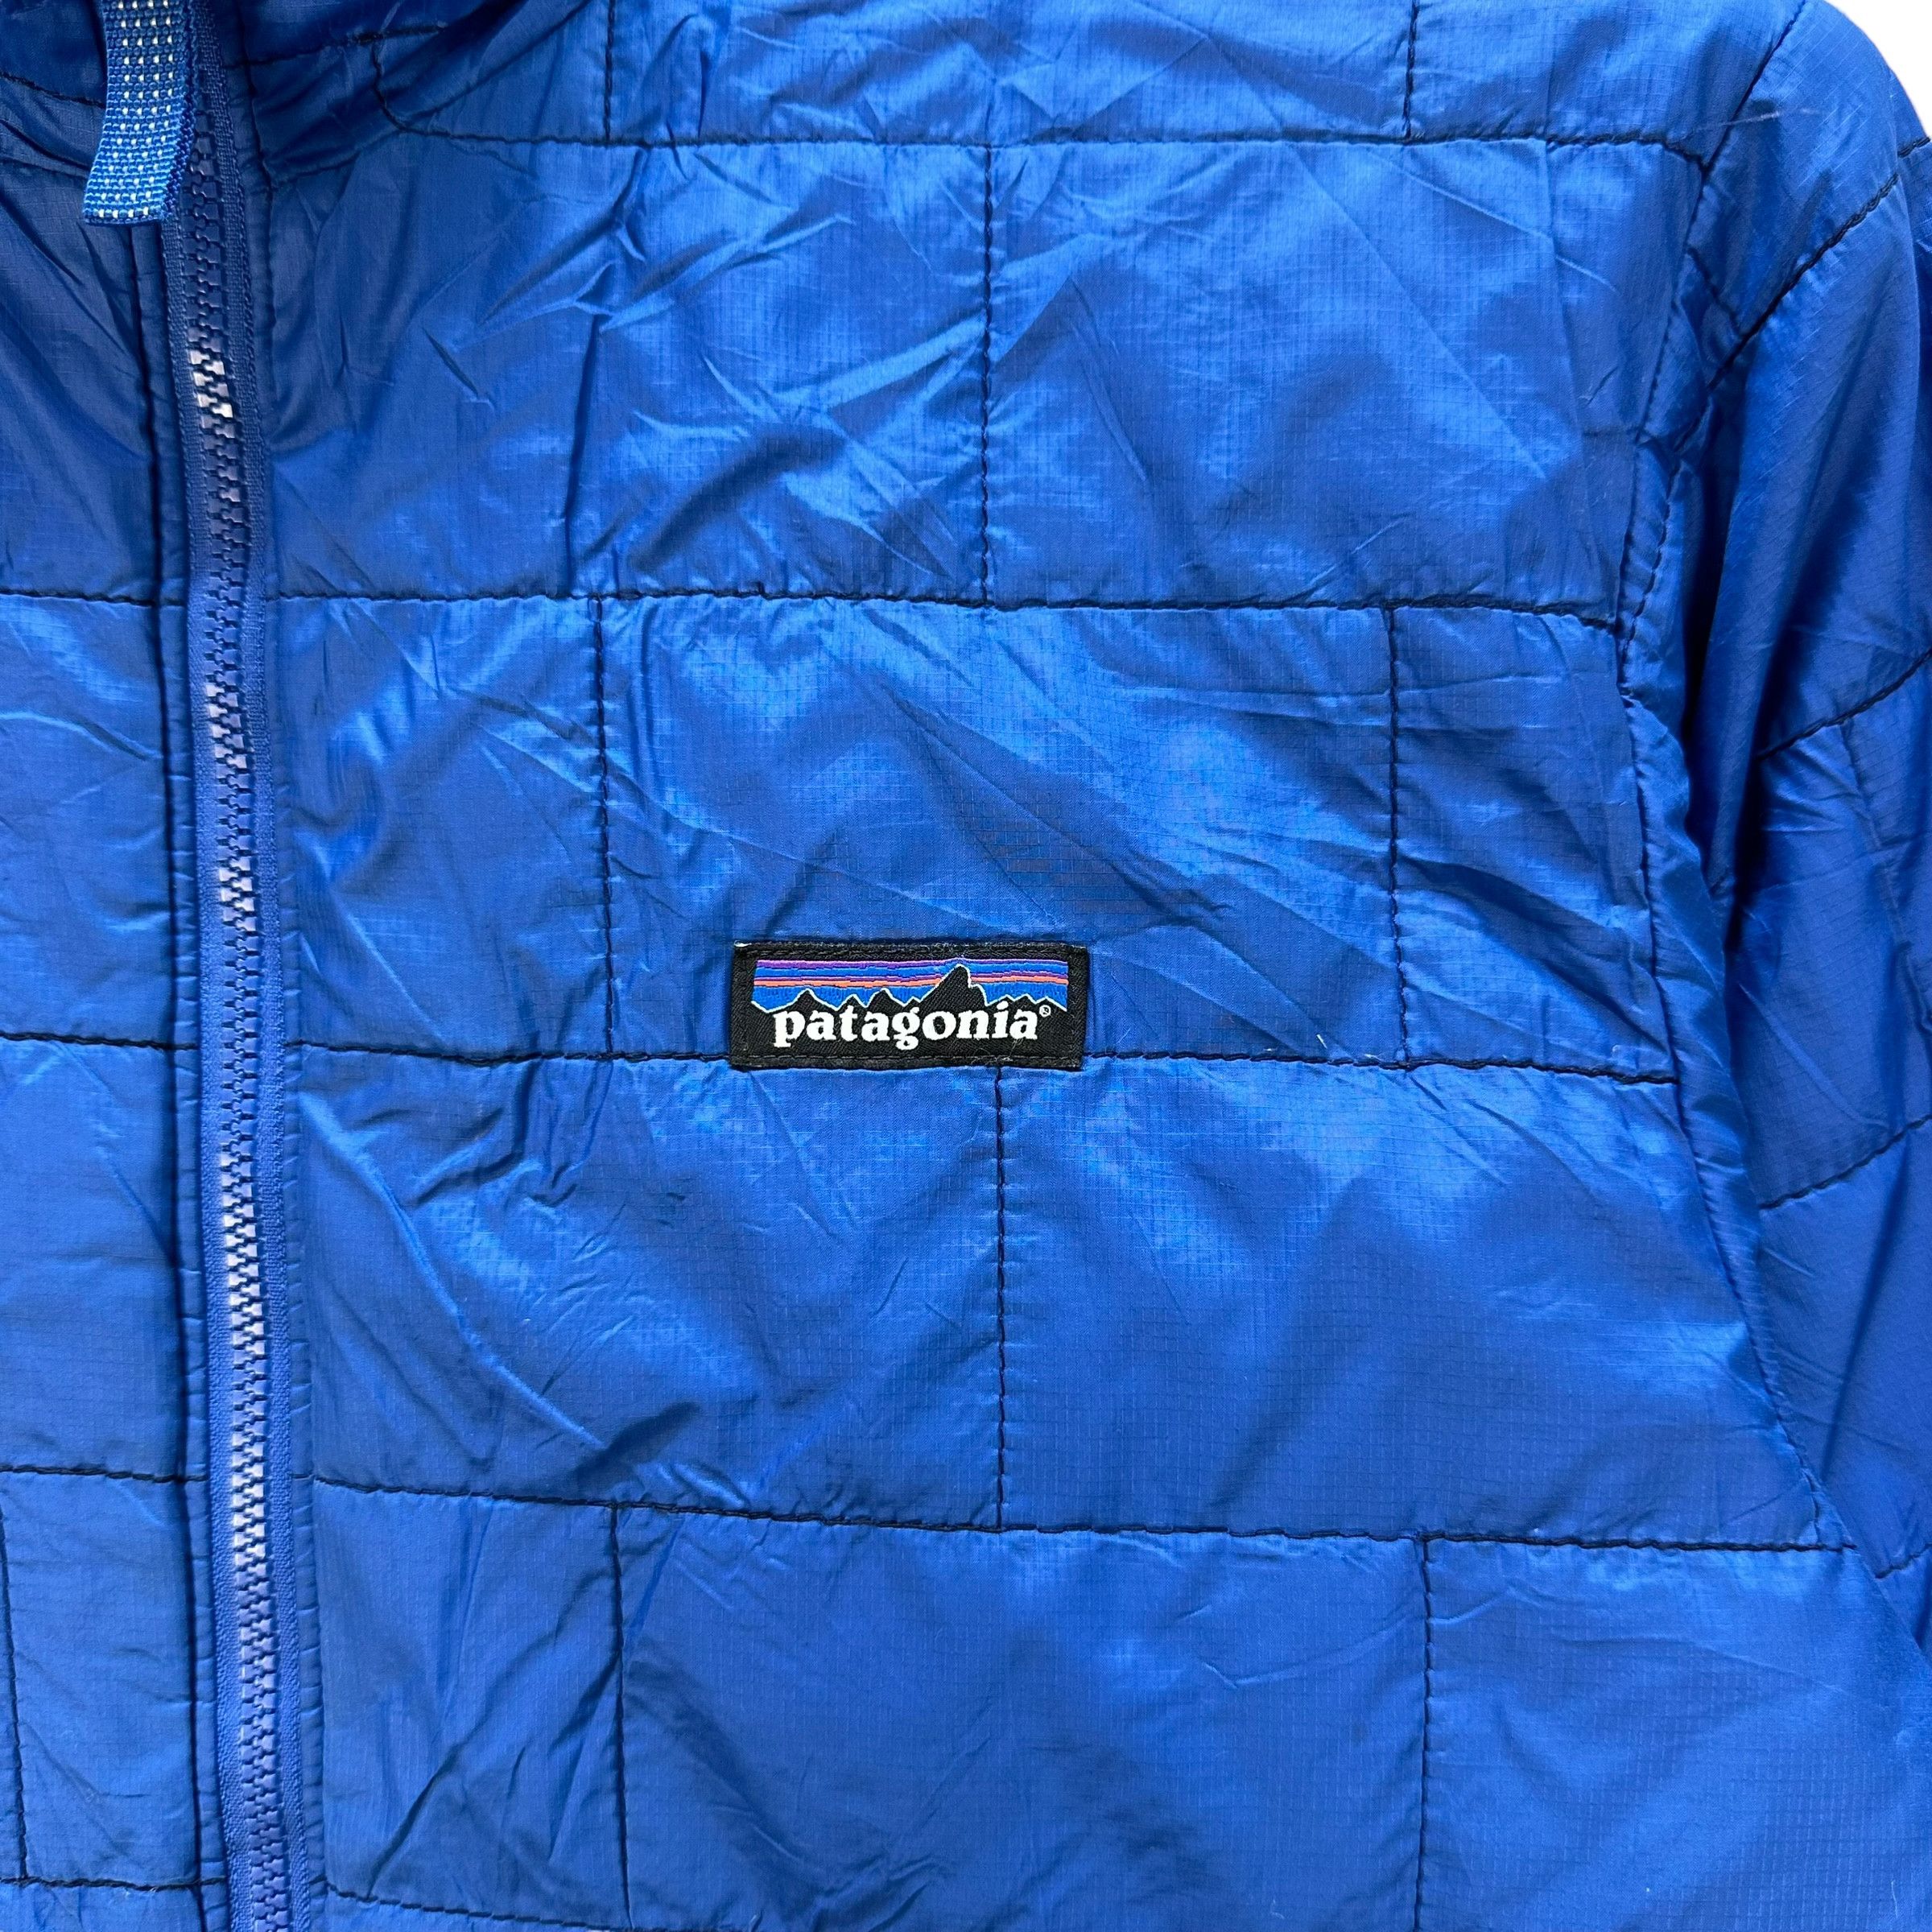 PATAGONIA LIGHT PUFFER JACKET IN BLUE FOR KIDS #9020-48 - 3